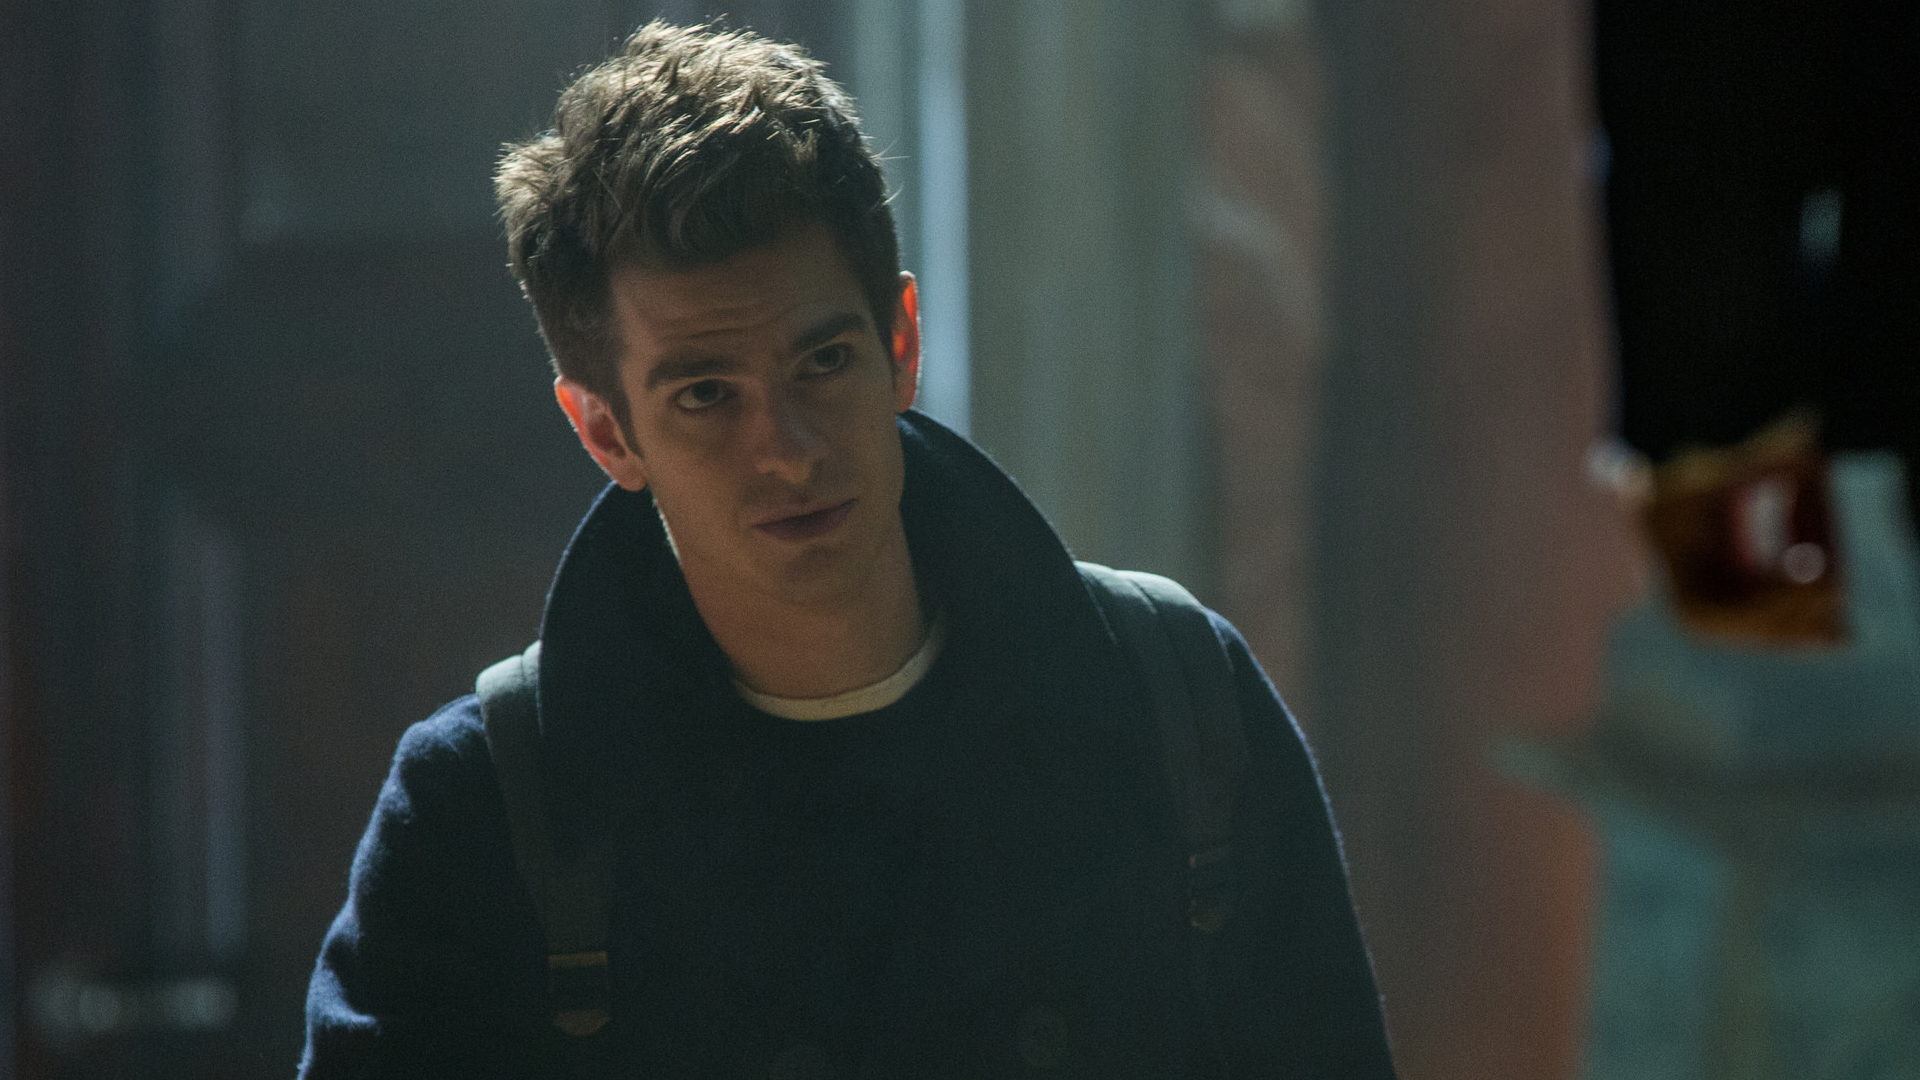 andrew garfield as peter parker in the amazing spider man 2 movie hd